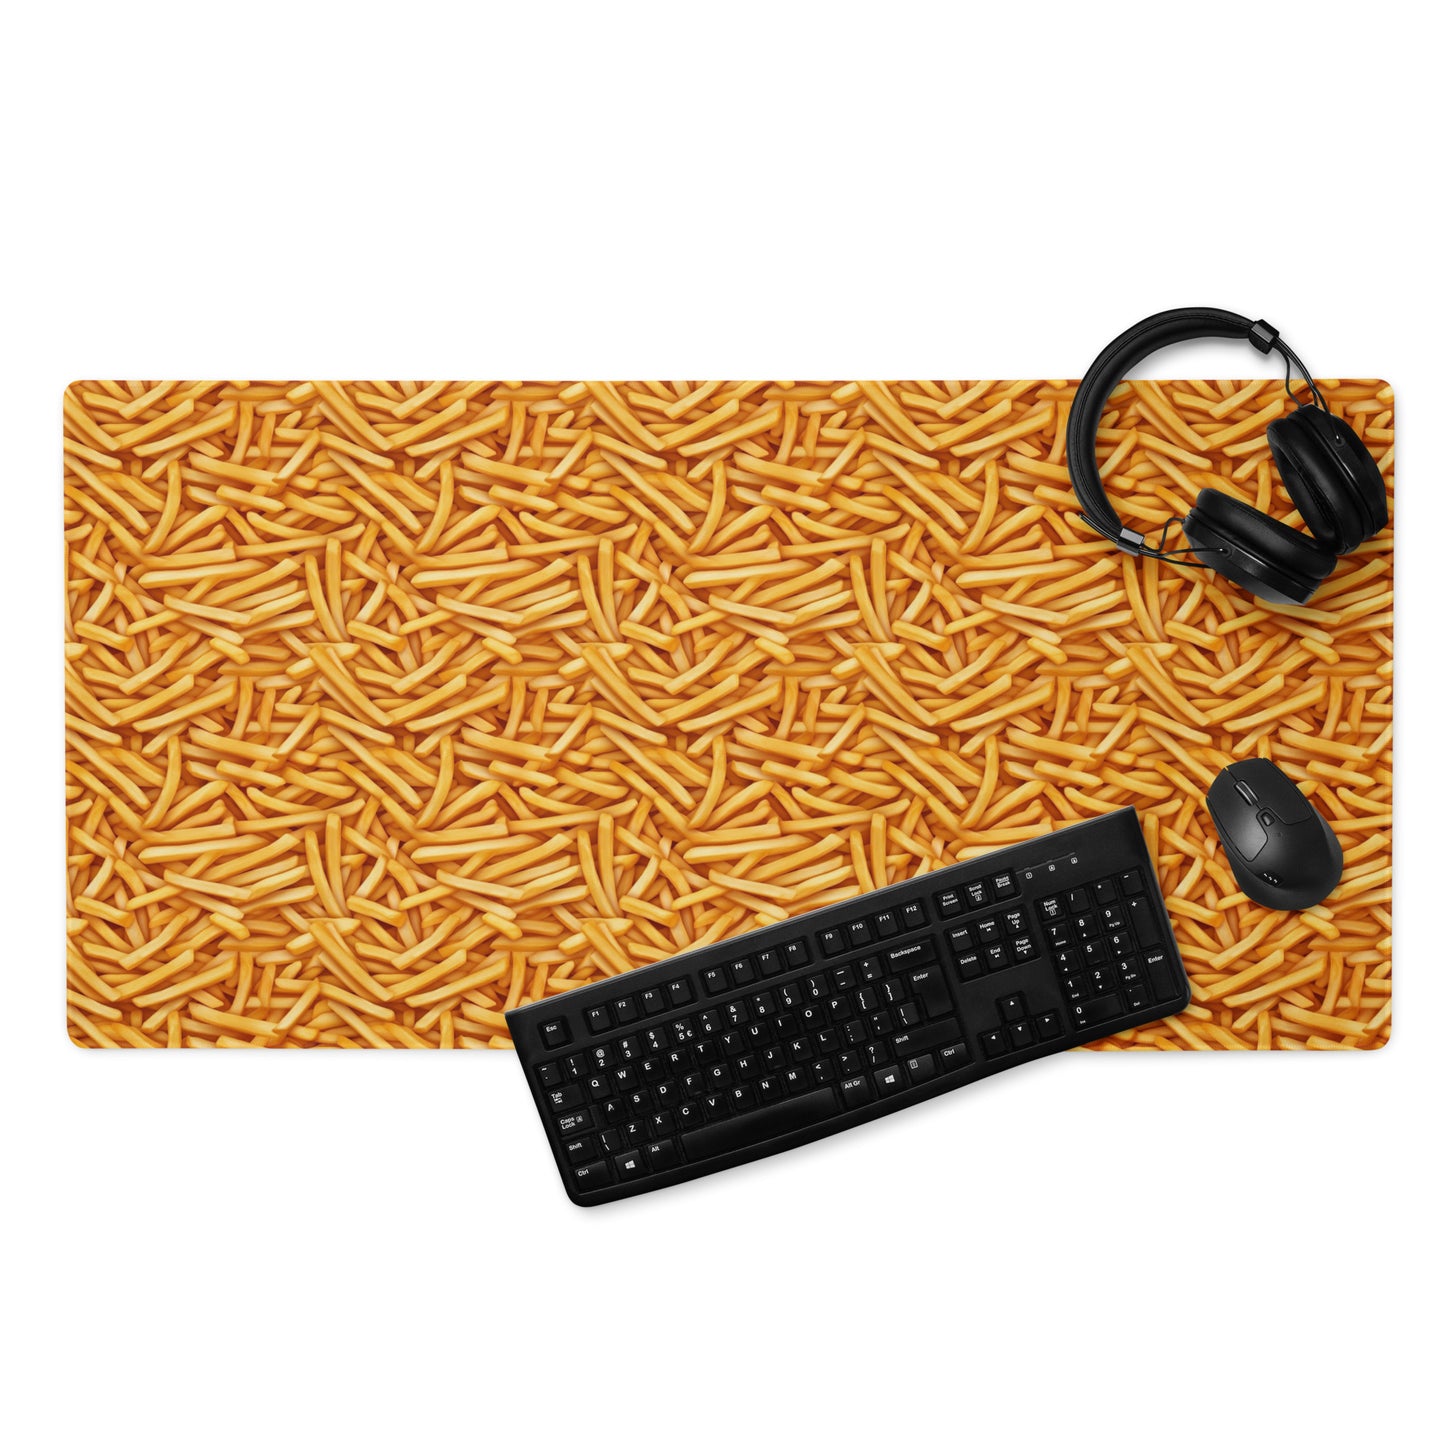 A 36" x 18" desk pad with a bunch of french fries all over it displayed with a keyboard, headphones and a mouse. Yellow in color.